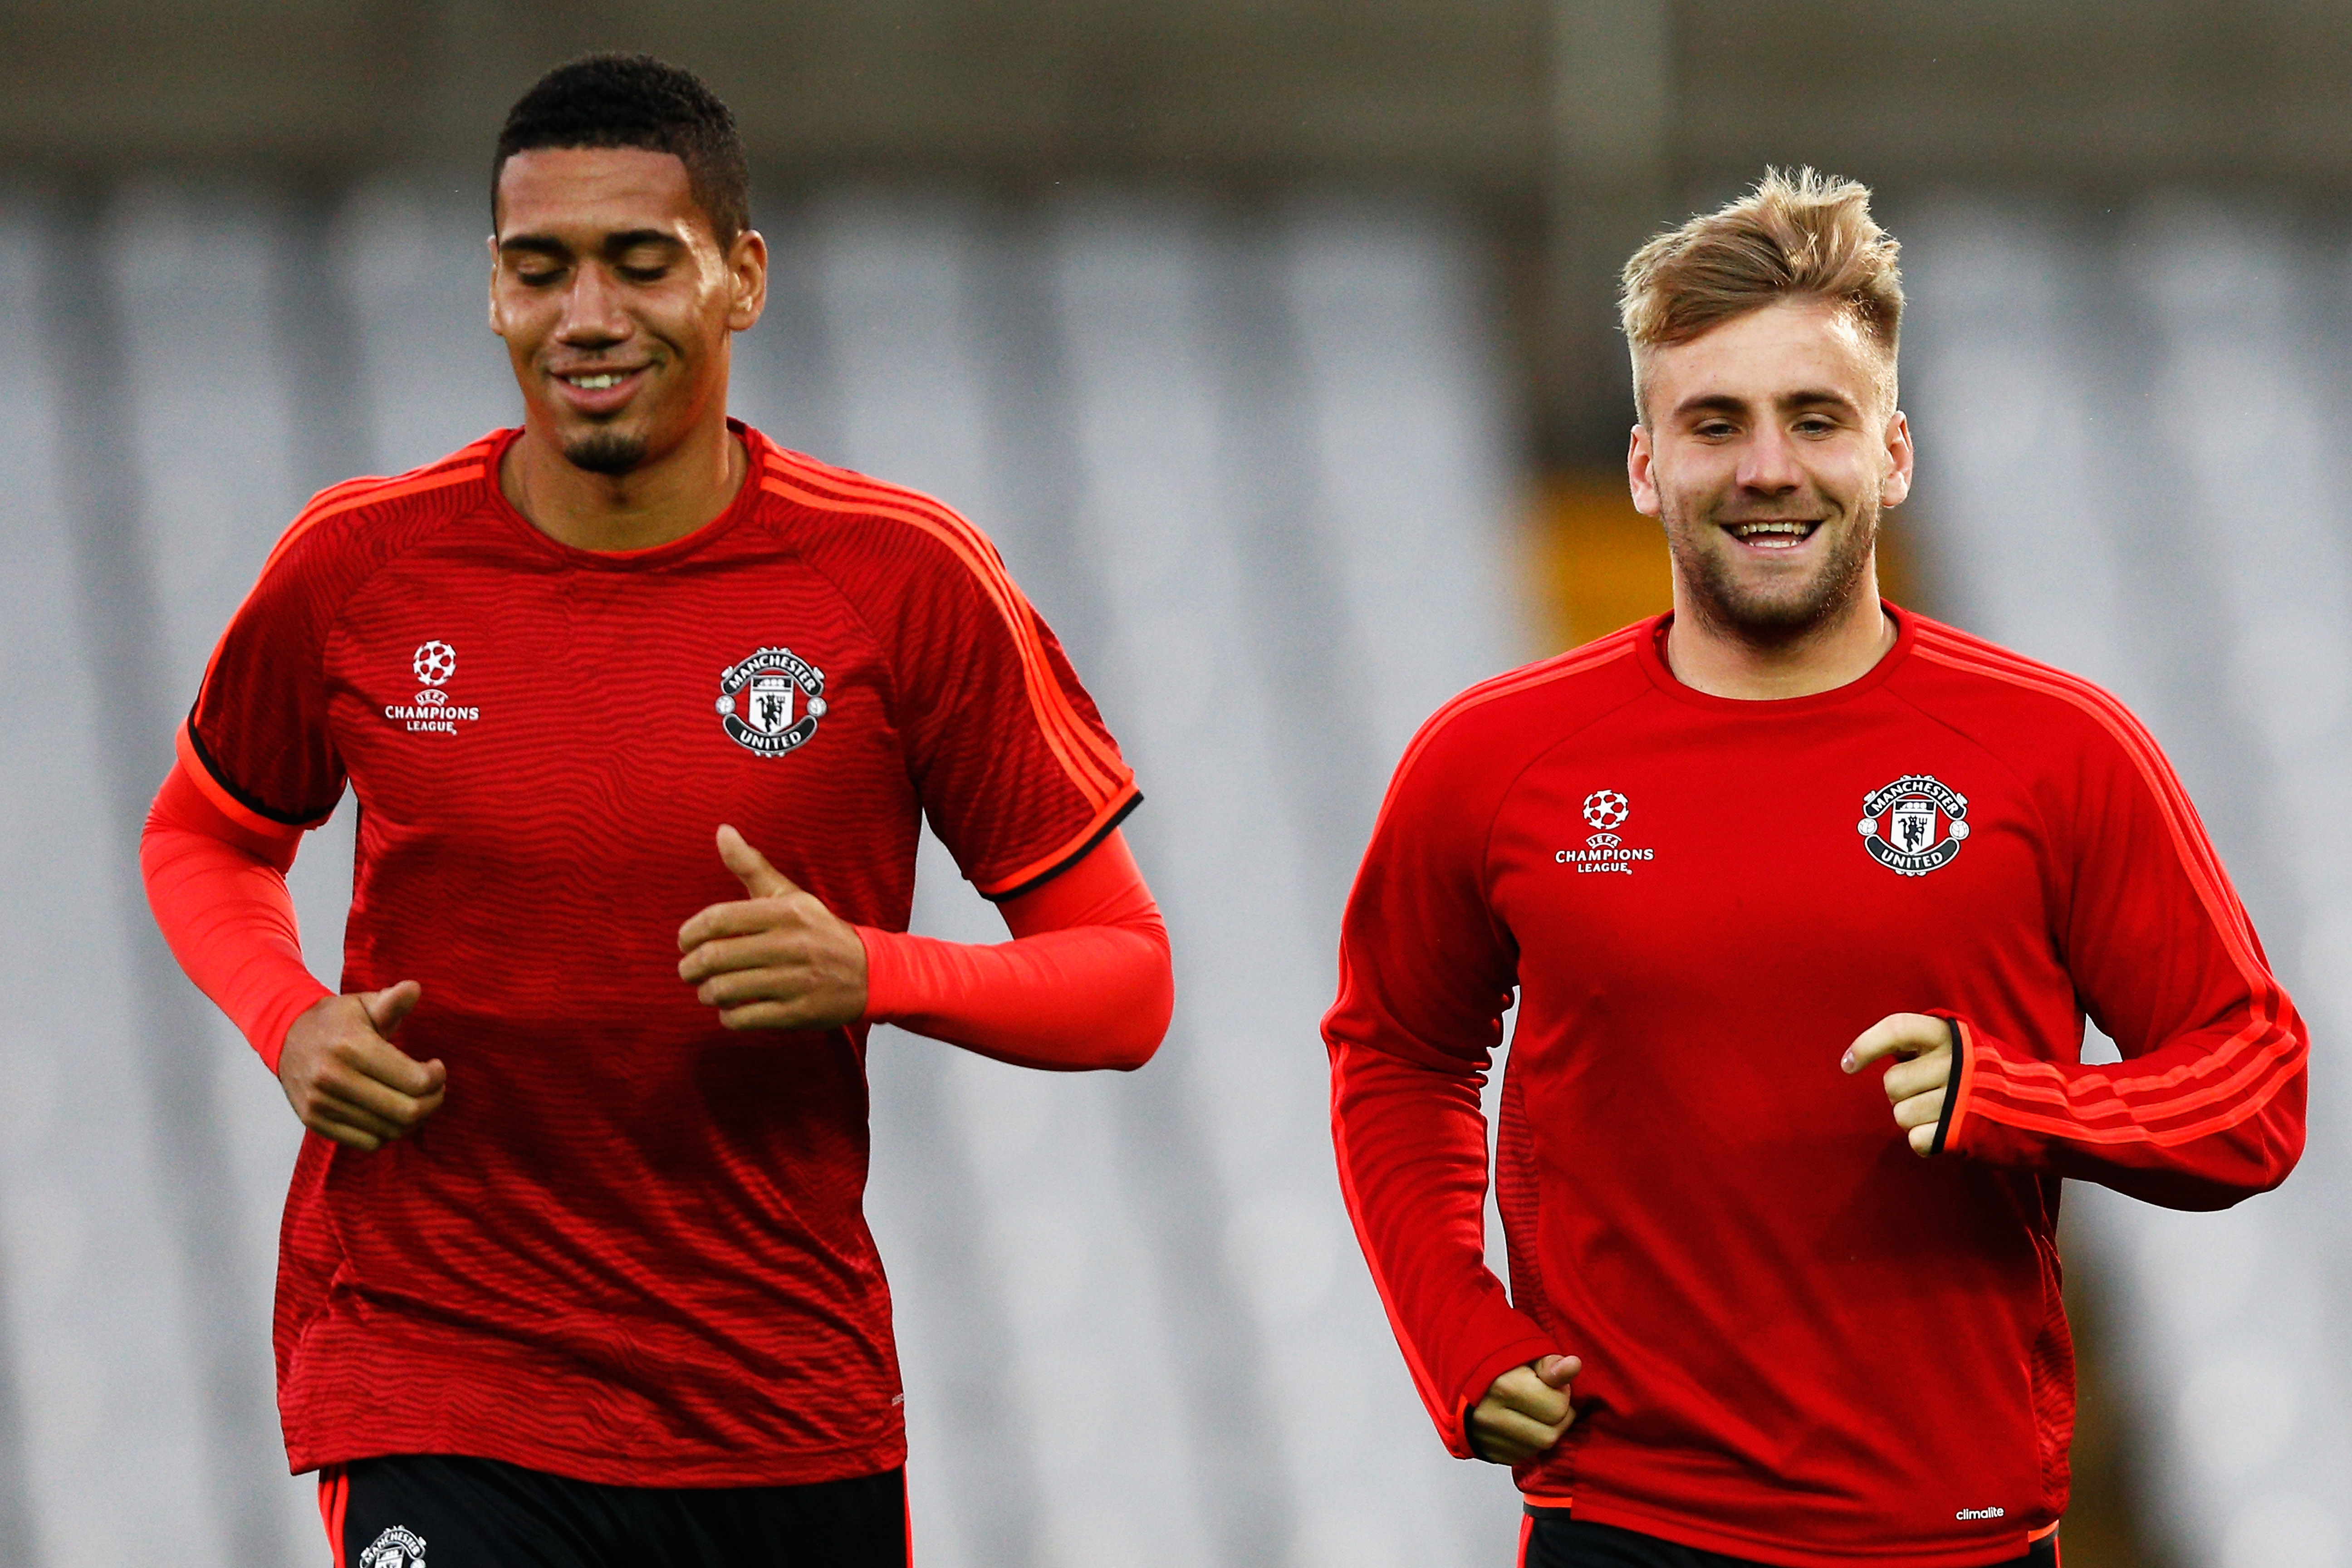 BRUGGE, BELGIUM - AUGUST 25:  Chris Smalling and Luke Shaw of Manchester United warm up during the Manchester United training session held at Jan Breydel Stadium on August 25, 2015 in Brugge, Belgium.  (Photo by Dean Mouhtaropoulos/Getty Images)